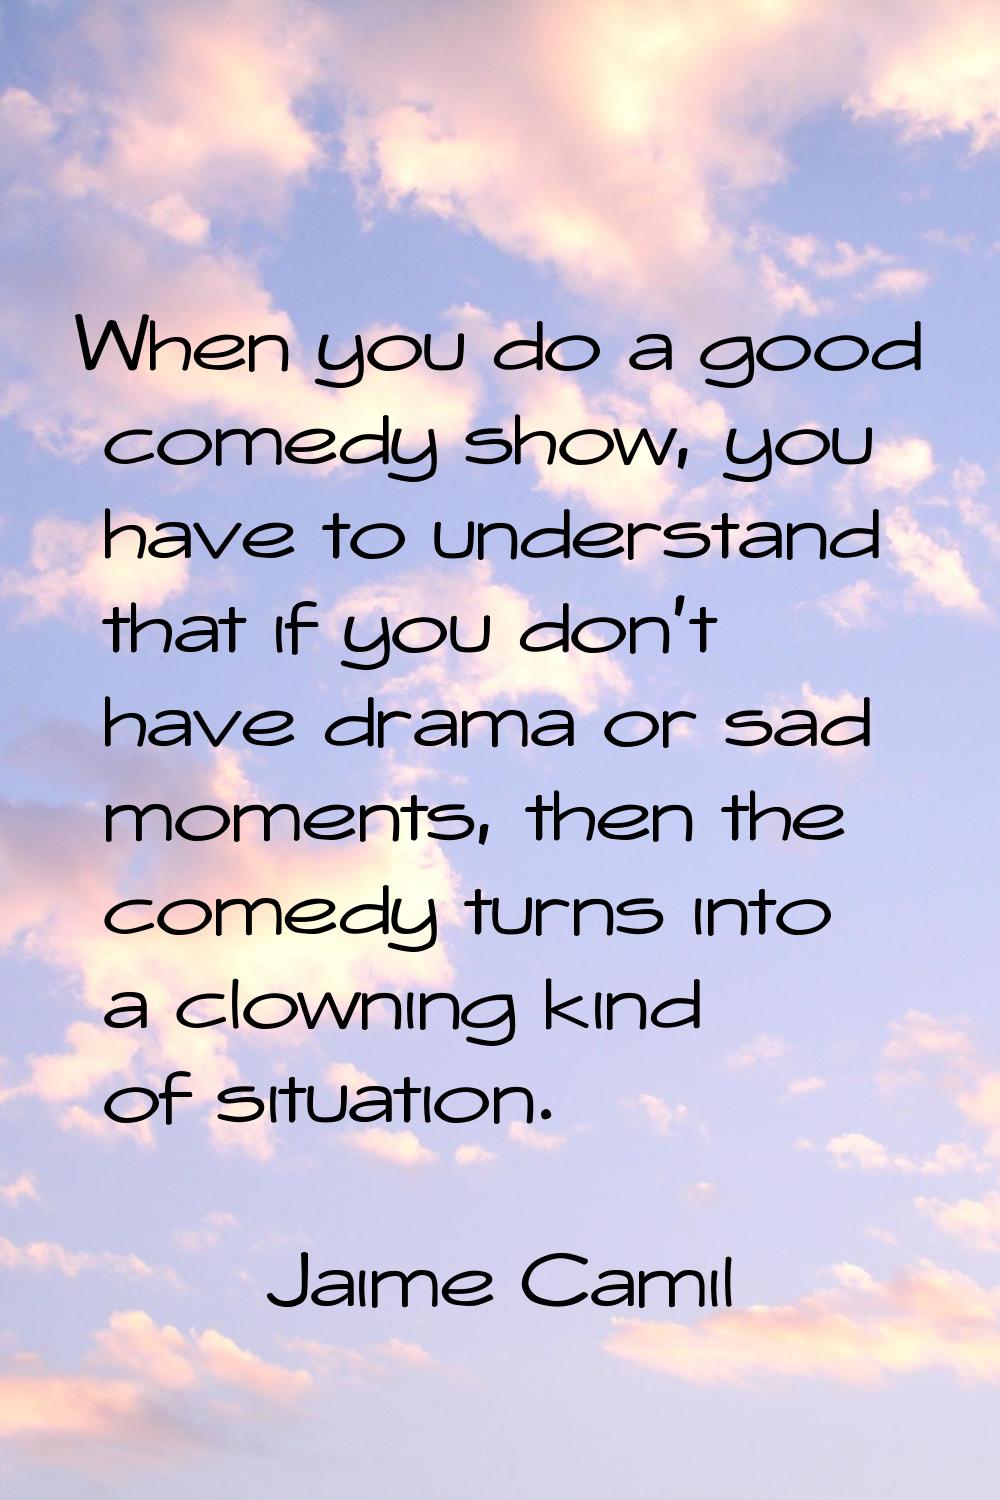 When you do a good comedy show, you have to understand that if you don't have drama or sad moments,